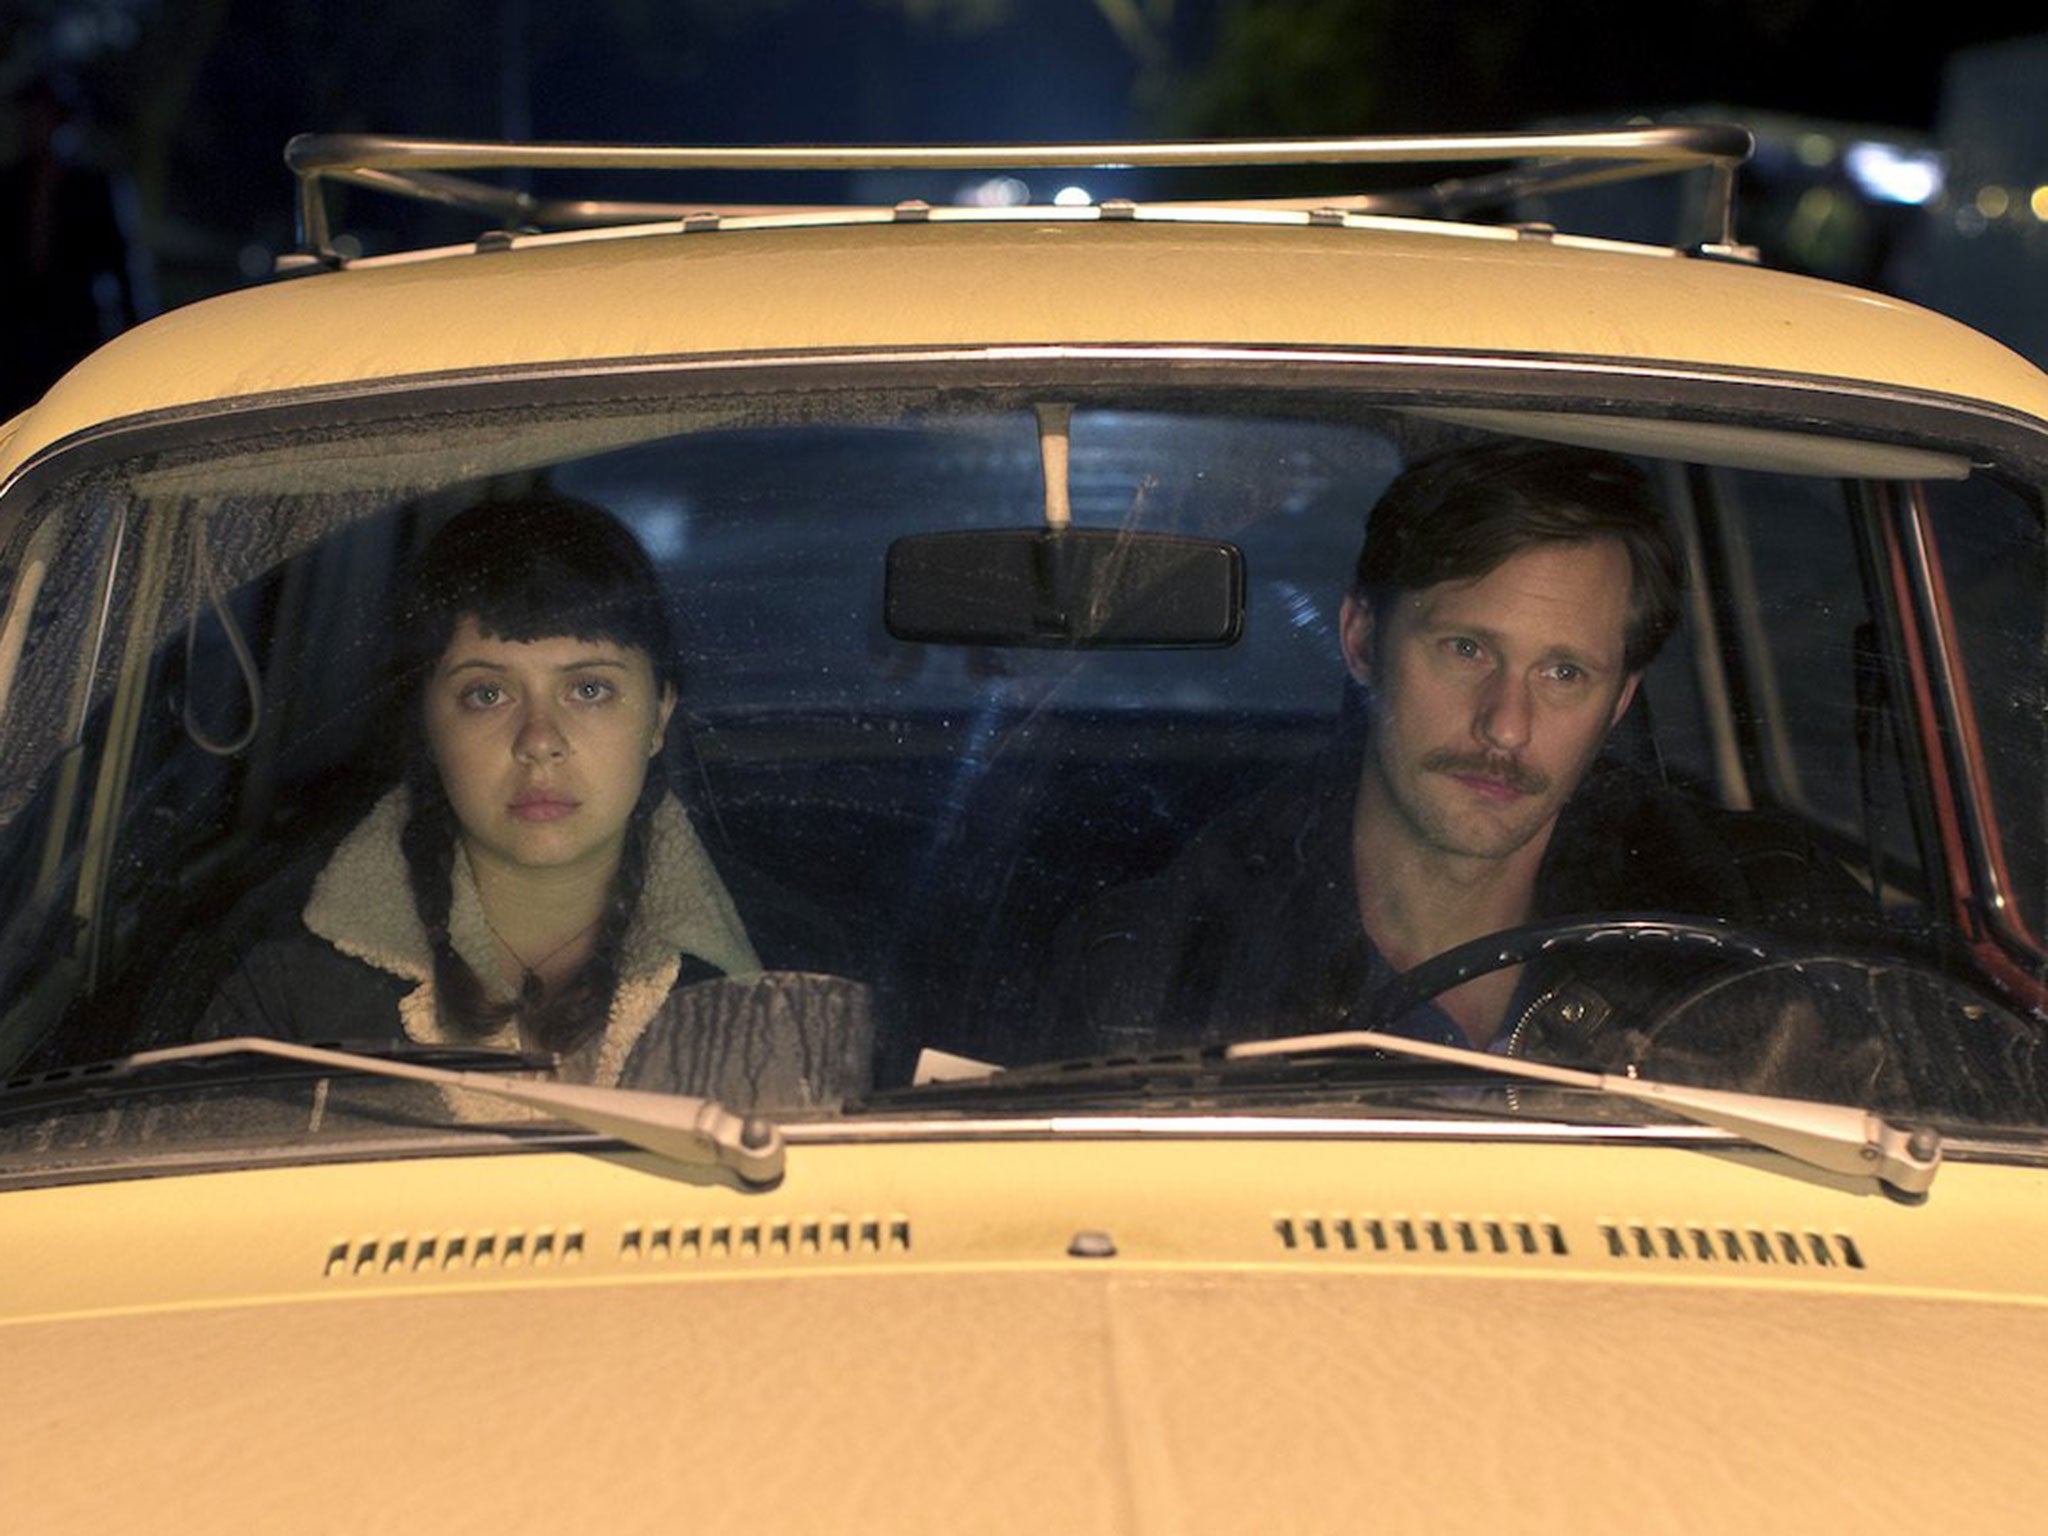 Marielle Heller's The Diary of a Teenage Girl is debuting at the Sundance Film Festival